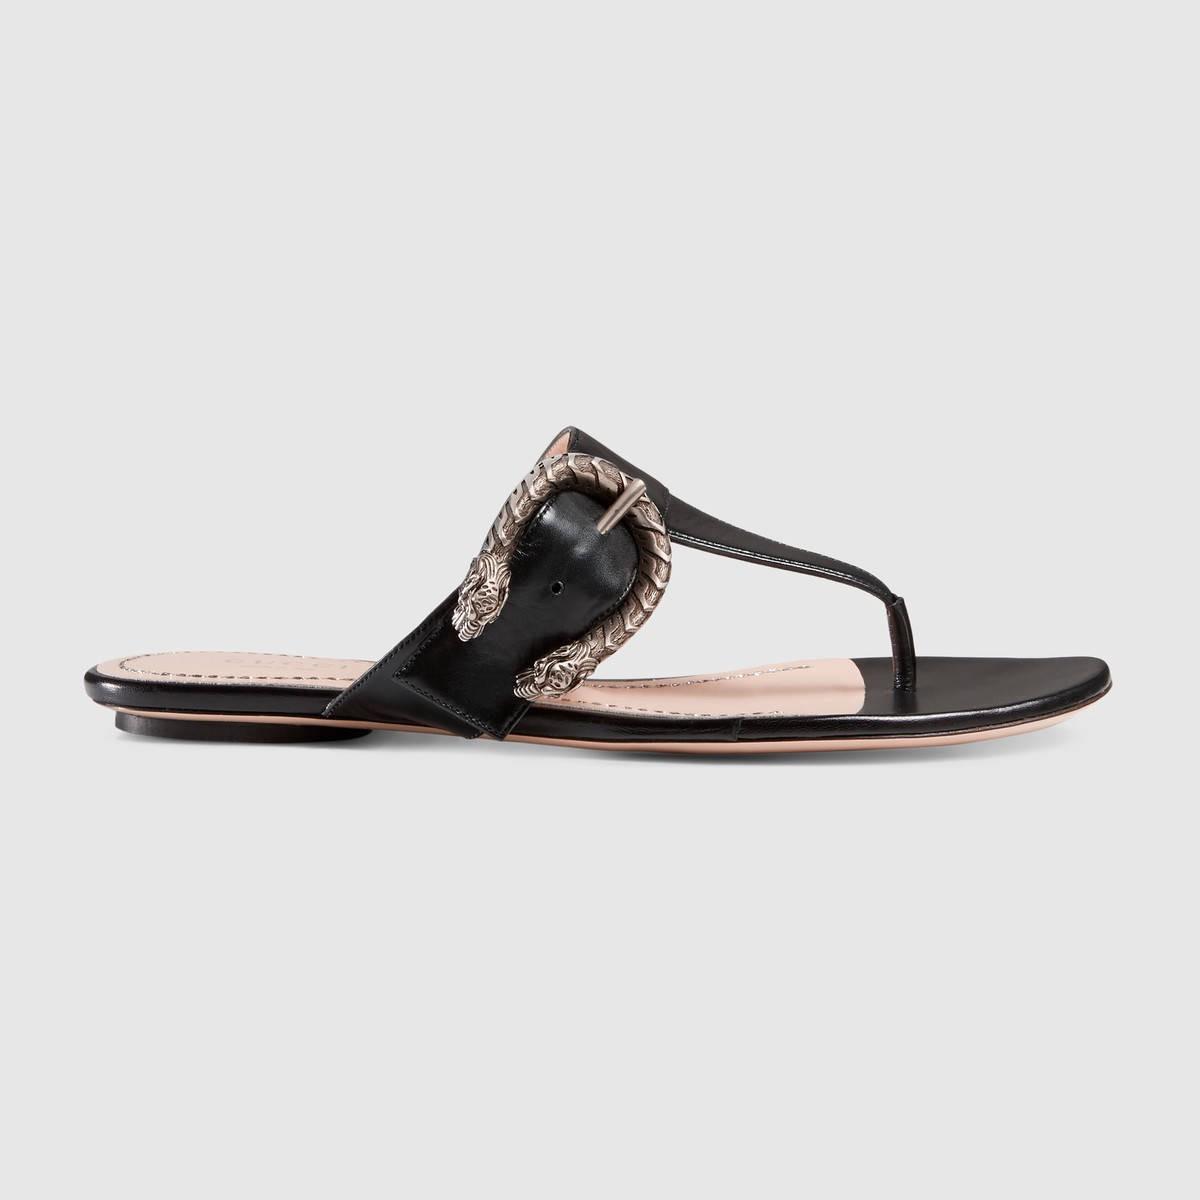 Gucci Leather Thong Sandal - Black Leather | ModeSens